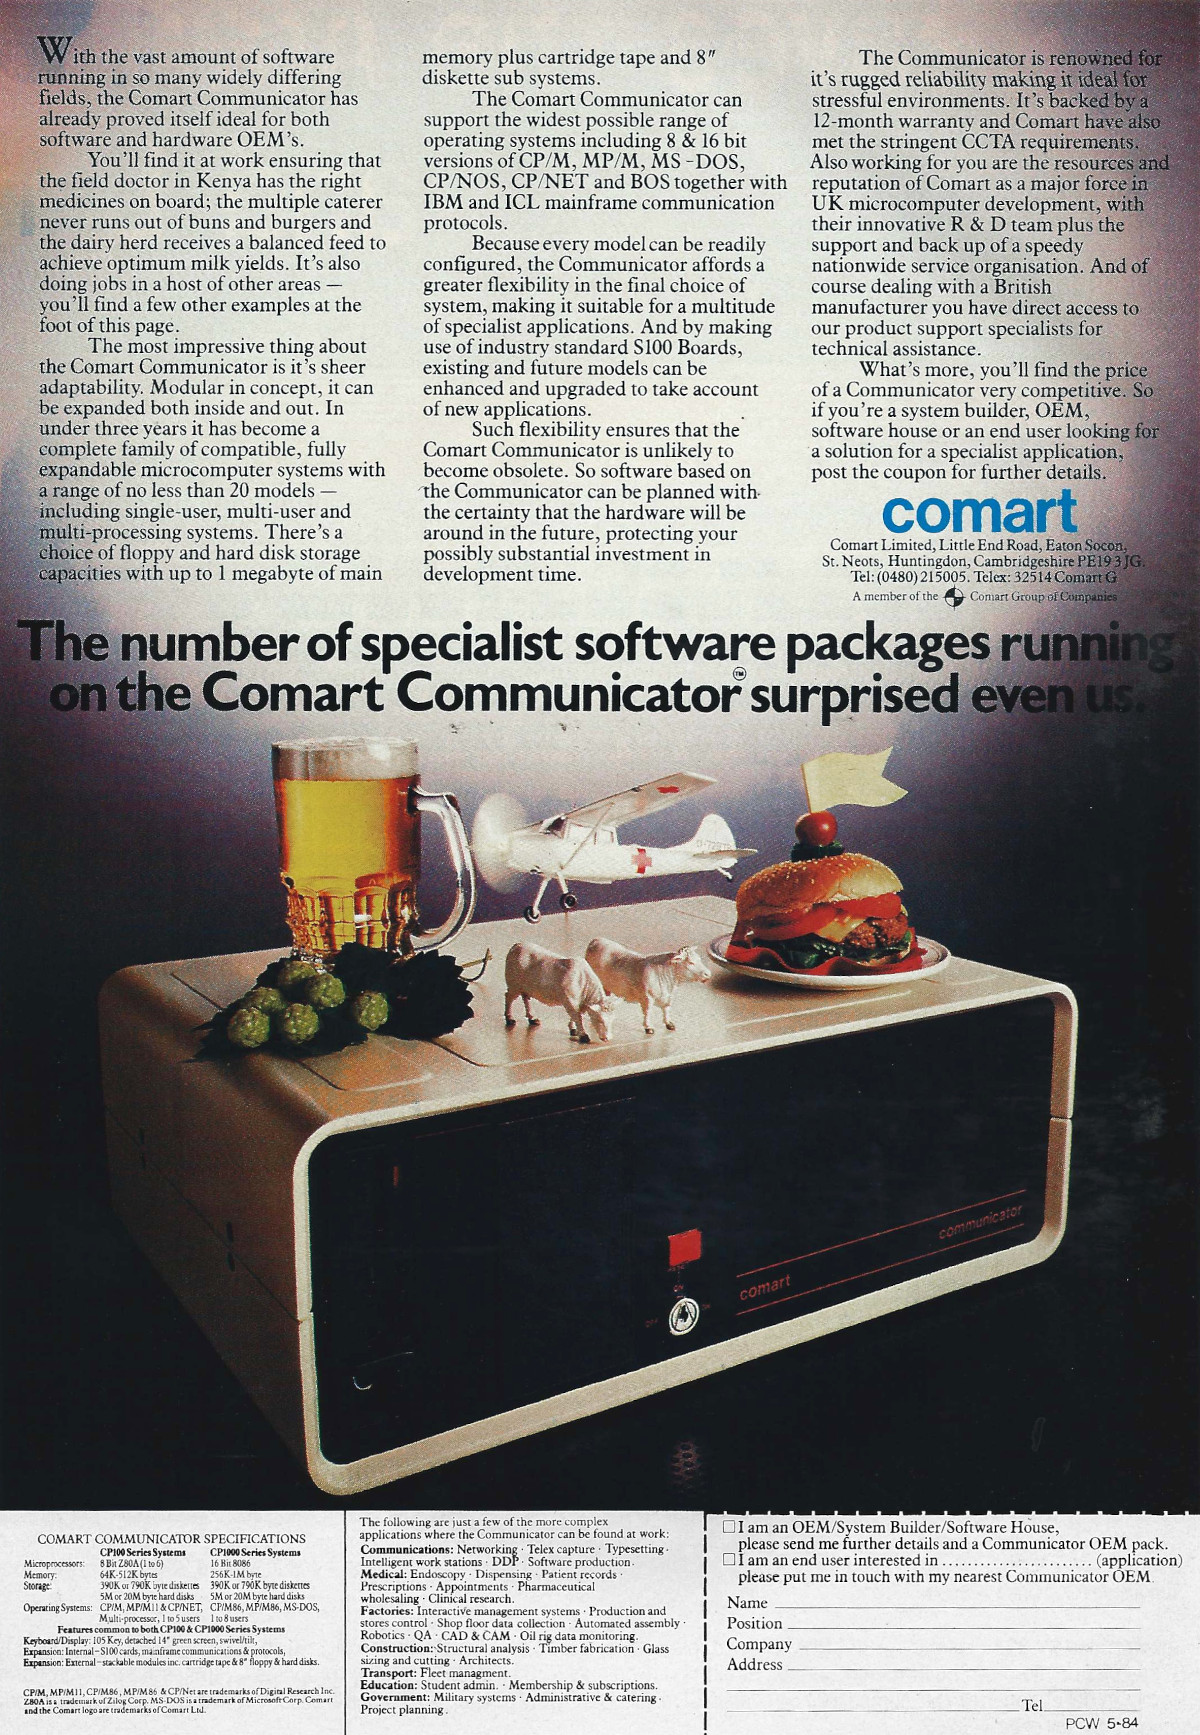 Comart's <span class='hilite'><span class='hilite'>Communicator</span></span> was still available in this advert from 1984, upping the ante in the 